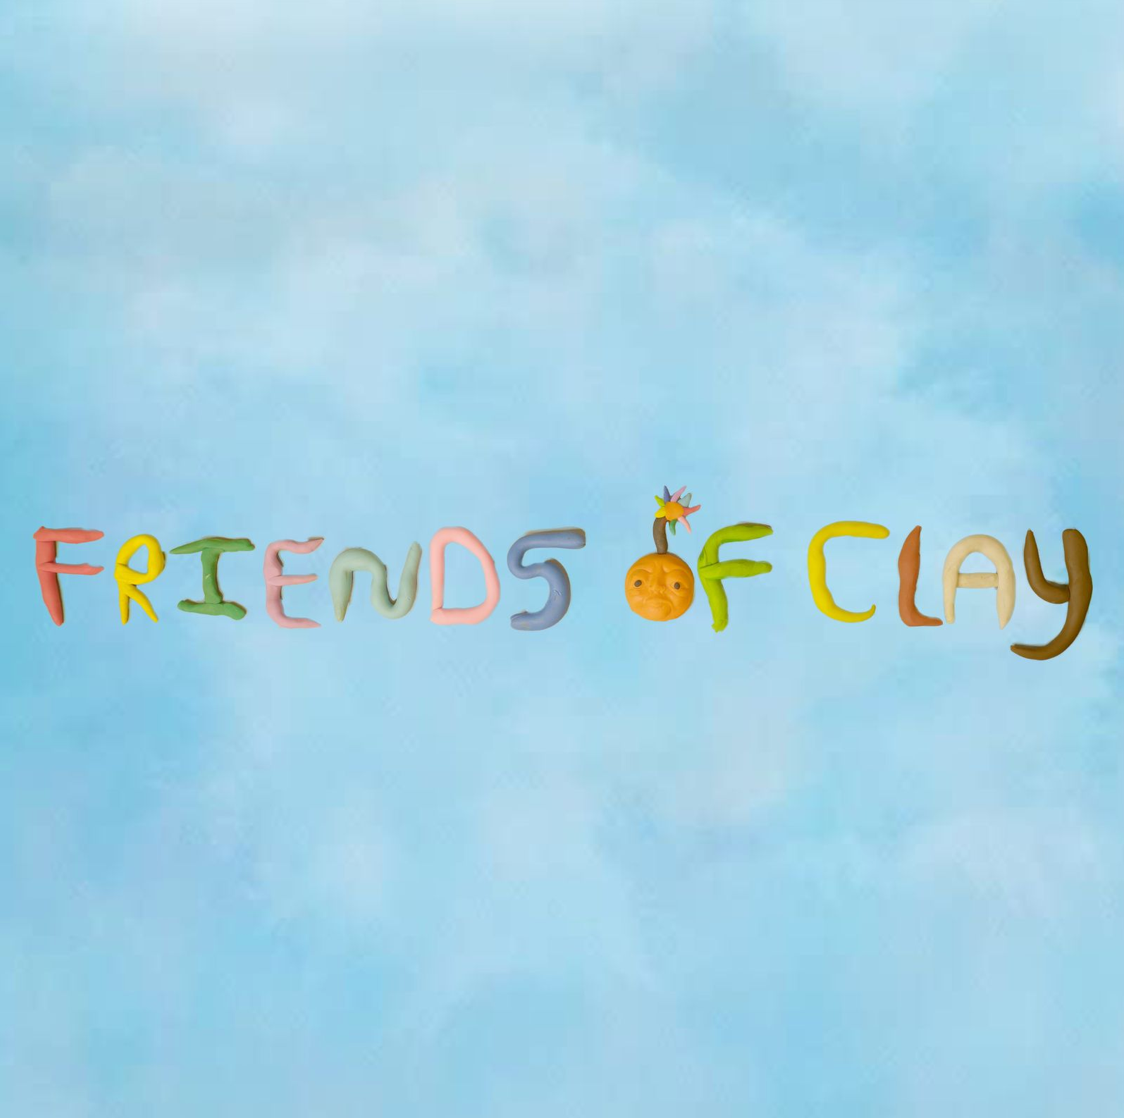 FRIENDS OF CLAY ANNOUNCES SELF TITLED DEBUT ALBUM TO BE RELEASED APRIL 16, 2021